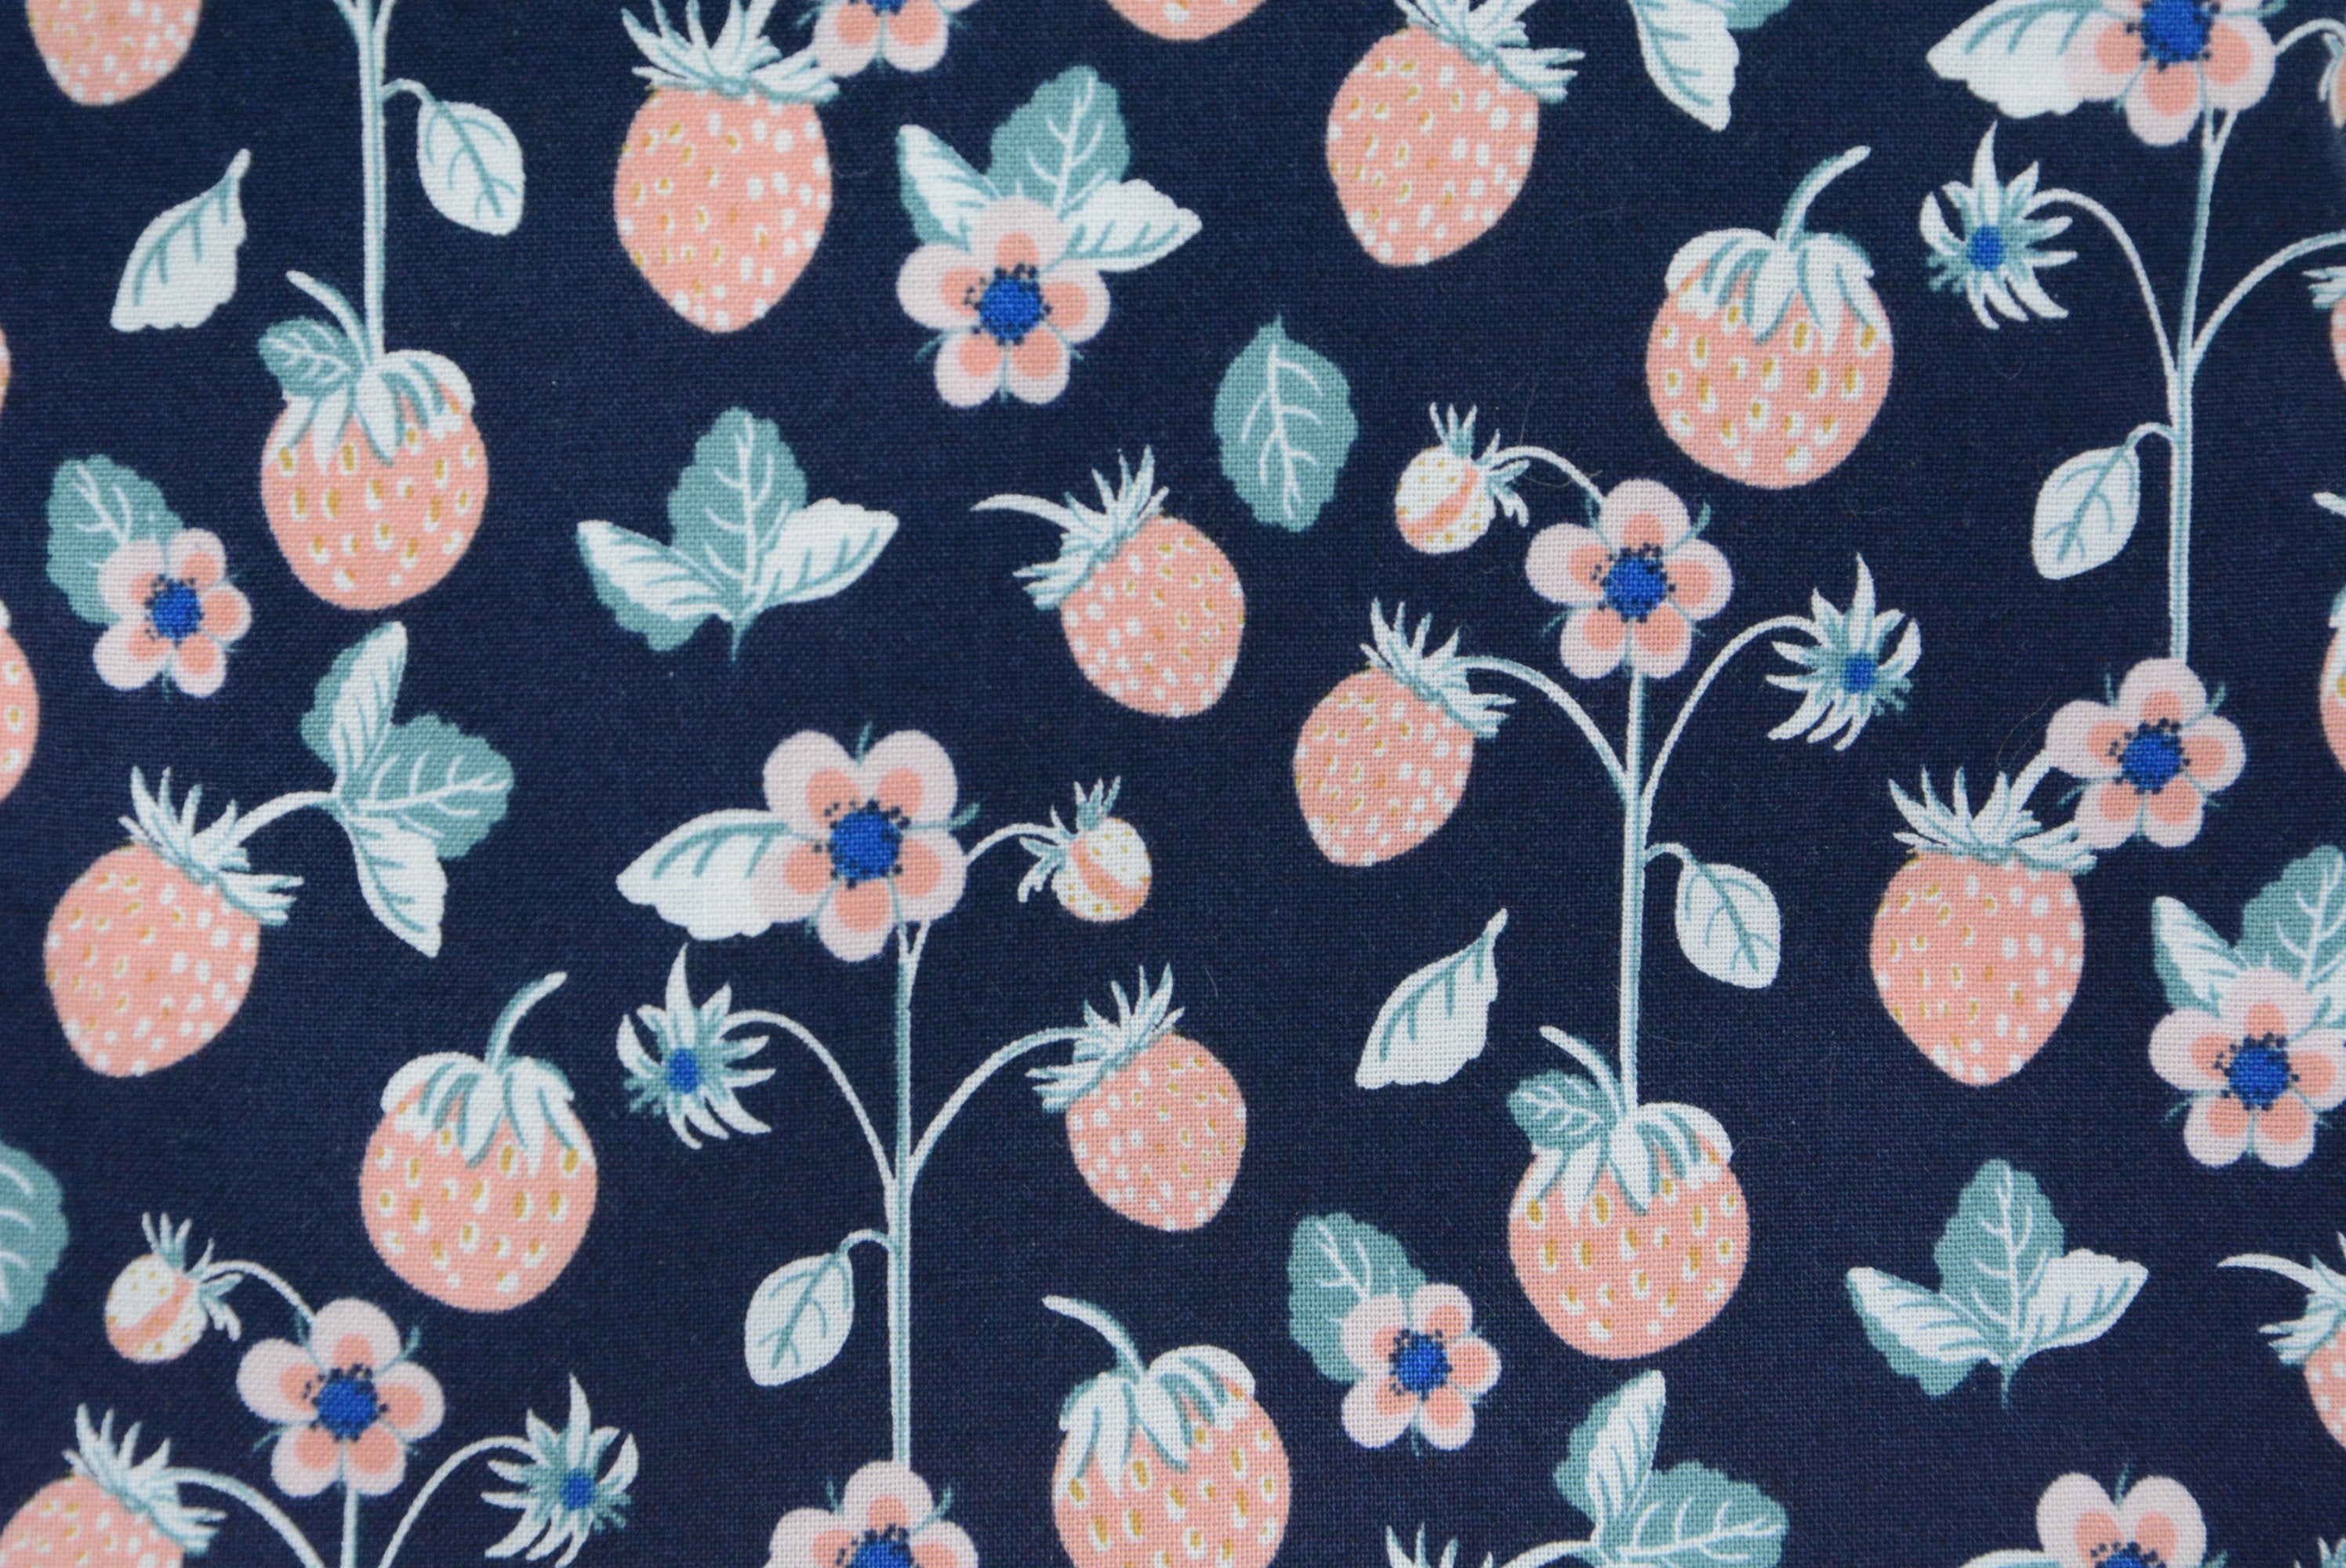 Strawberries and Flowers on Navy Blue